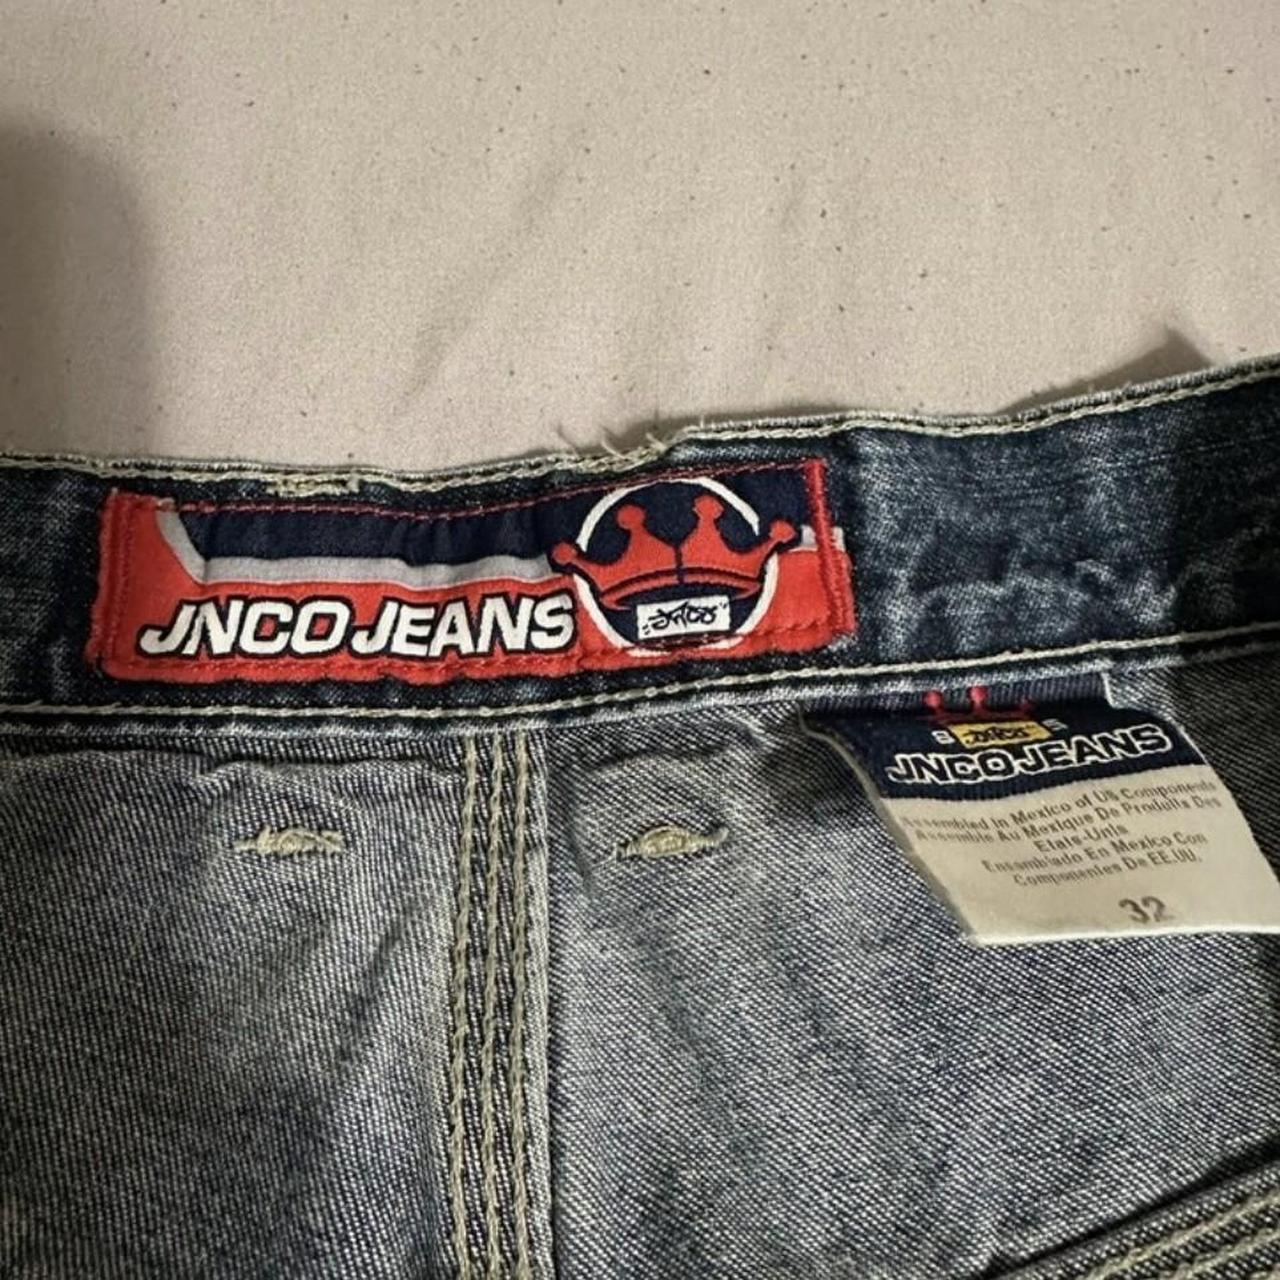 JNCO Men's Red and Blue Jeans | Depop